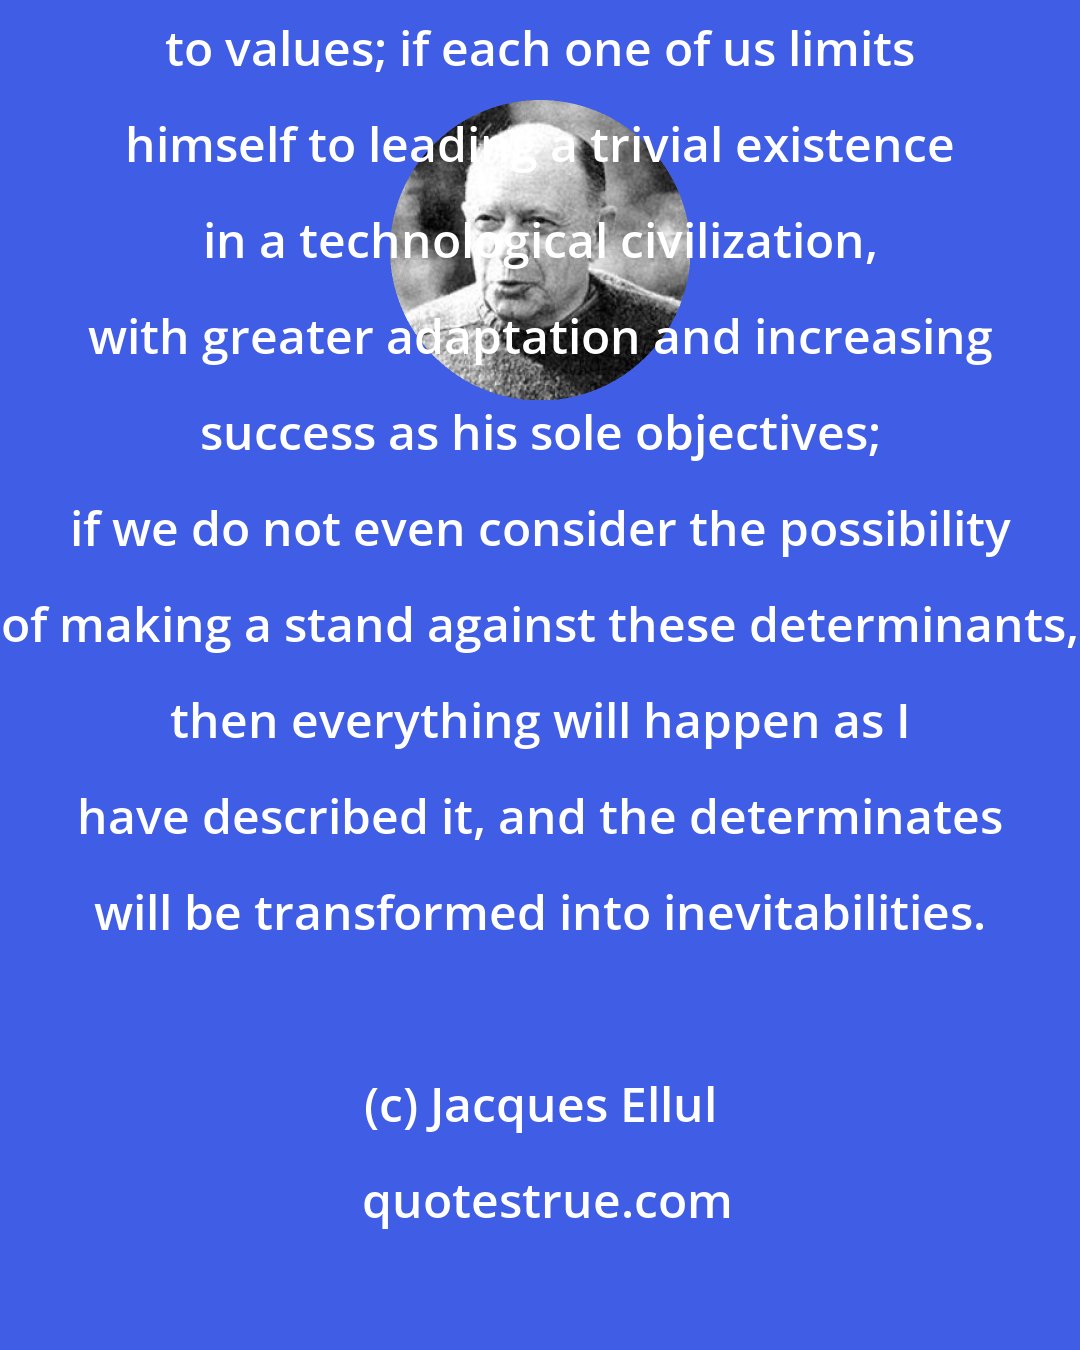 Jacques Ellul: If man--if each one of us--abdicates his responsibilities with regard to values; if each one of us limits himself to leading a trivial existence in a technological civilization, with greater adaptation and increasing success as his sole objectives; if we do not even consider the possibility of making a stand against these determinants, then everything will happen as I have described it, and the determinates will be transformed into inevitabilities.